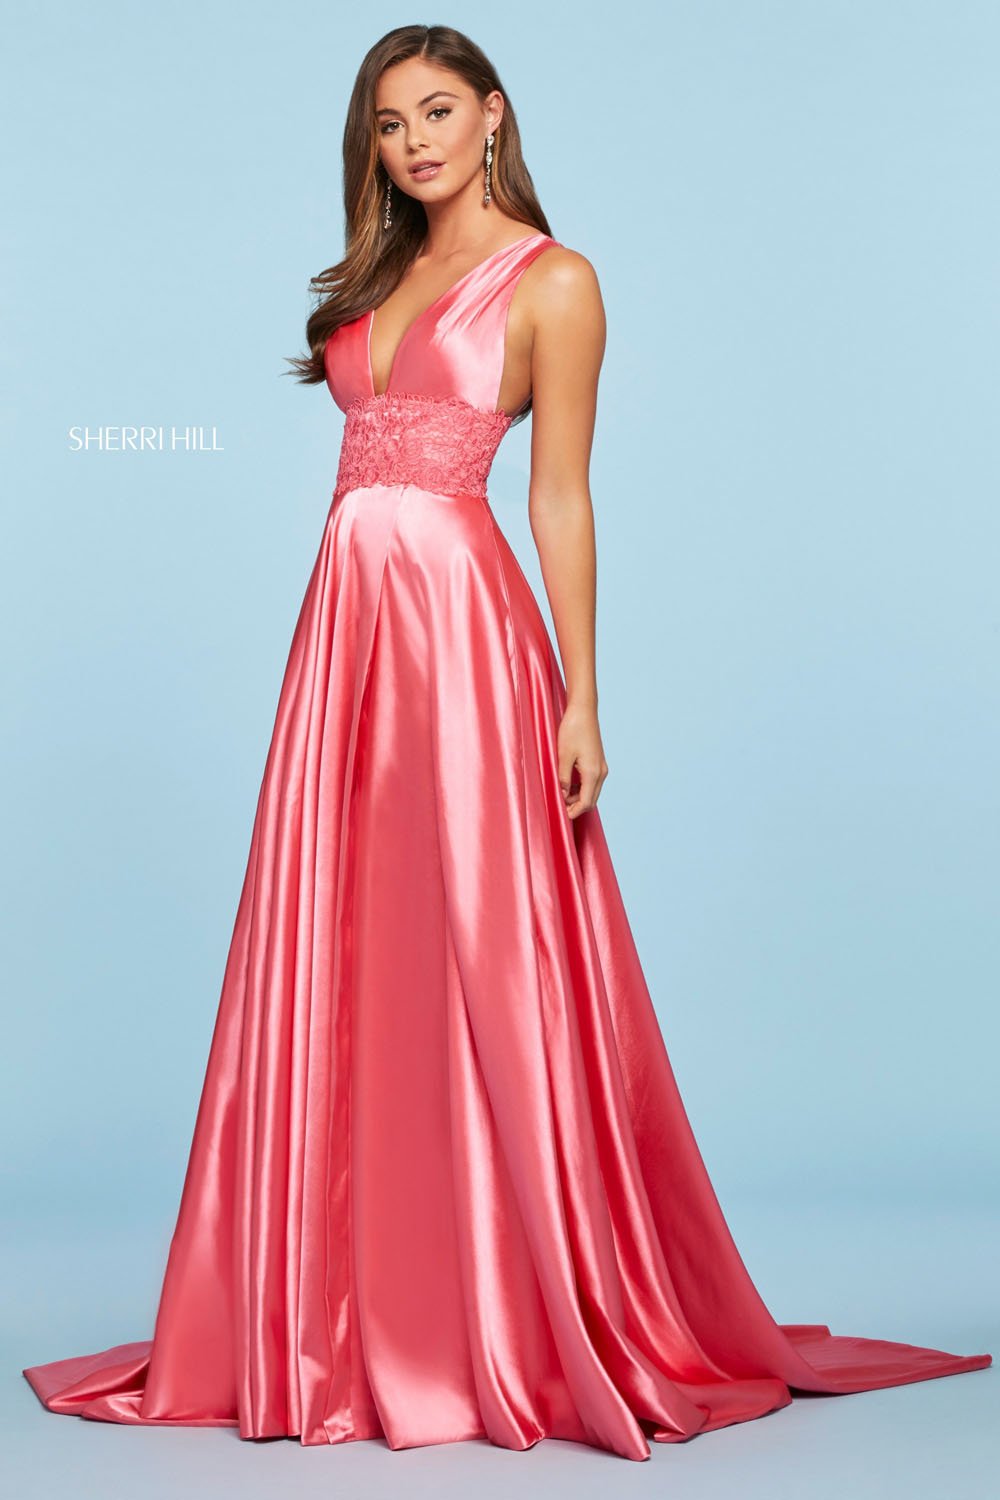 Sherri Hill 53352 dress images in these colors: Coral, Vintage Coral, Rose, Turquoise, Red, Emerald, Lilac, Ivory, Navy, Royal, Light Blue, Wine, Mocha, Black, Yellow.